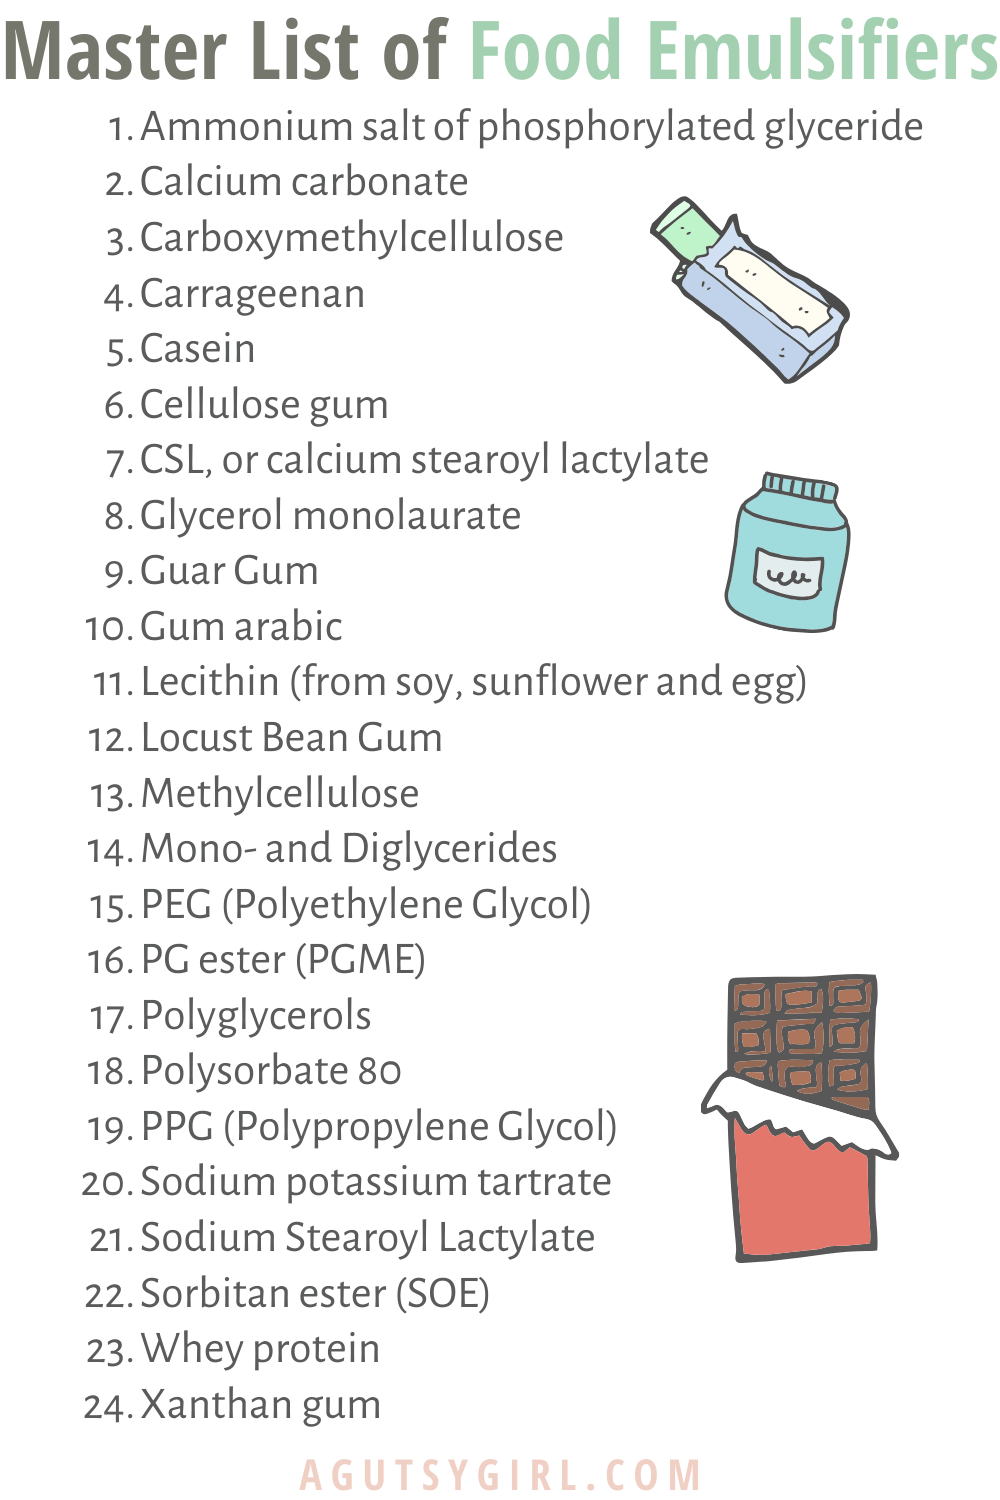 Your Guide to Emulsifiers in Food agutsygirl.com #emulsifiers #guthealth #packagedfoods master list